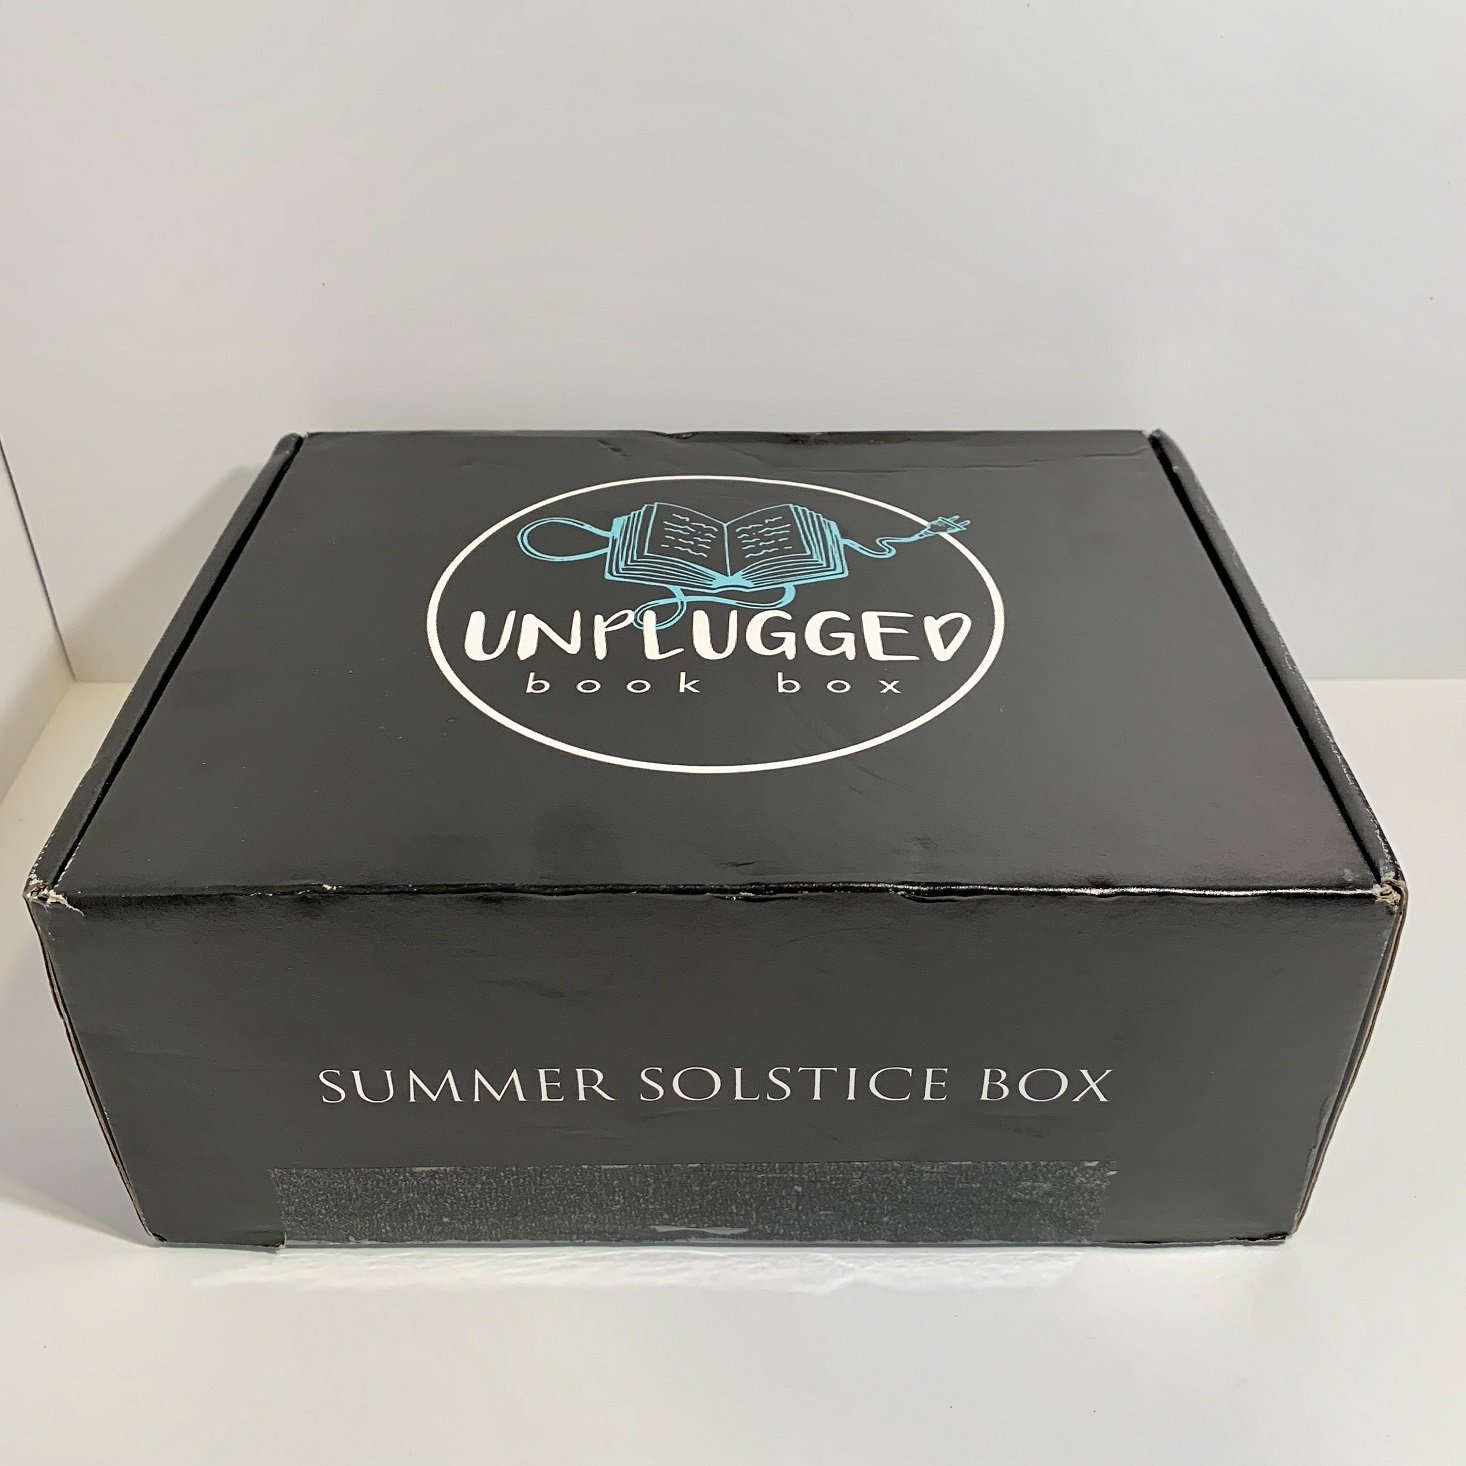 Unplugged Book Box Review + Coupon – Create Your Own Sunshine